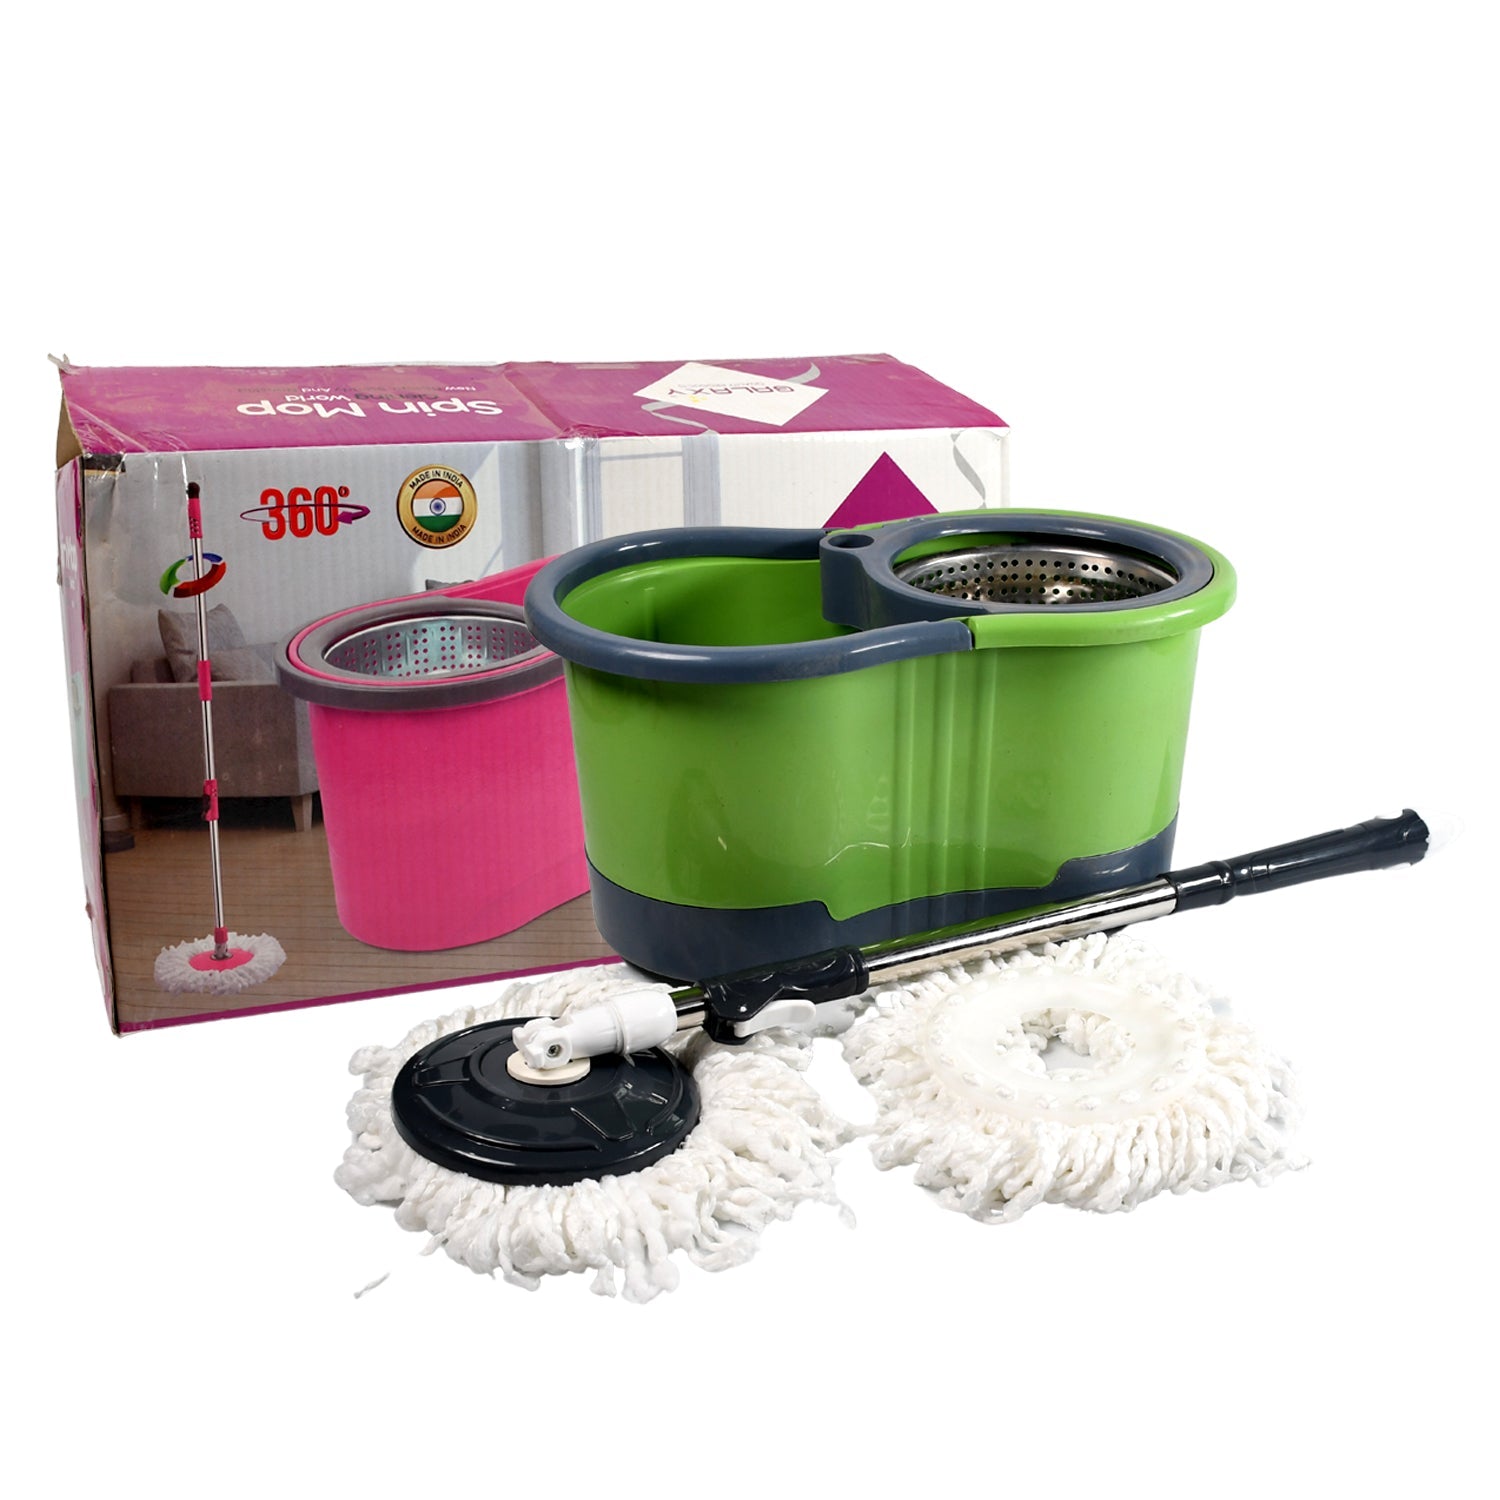 1183 MOP WITH BUCKET FOR FLOOR CLEANING/MOP FOR FLOOR CLEANING / FLOOR CLEANER MOP / SPIN MOP / MAGIC MOP / MOP STICK / SPIN MOP SET WITH BUCKET (B Grade) DeoDap